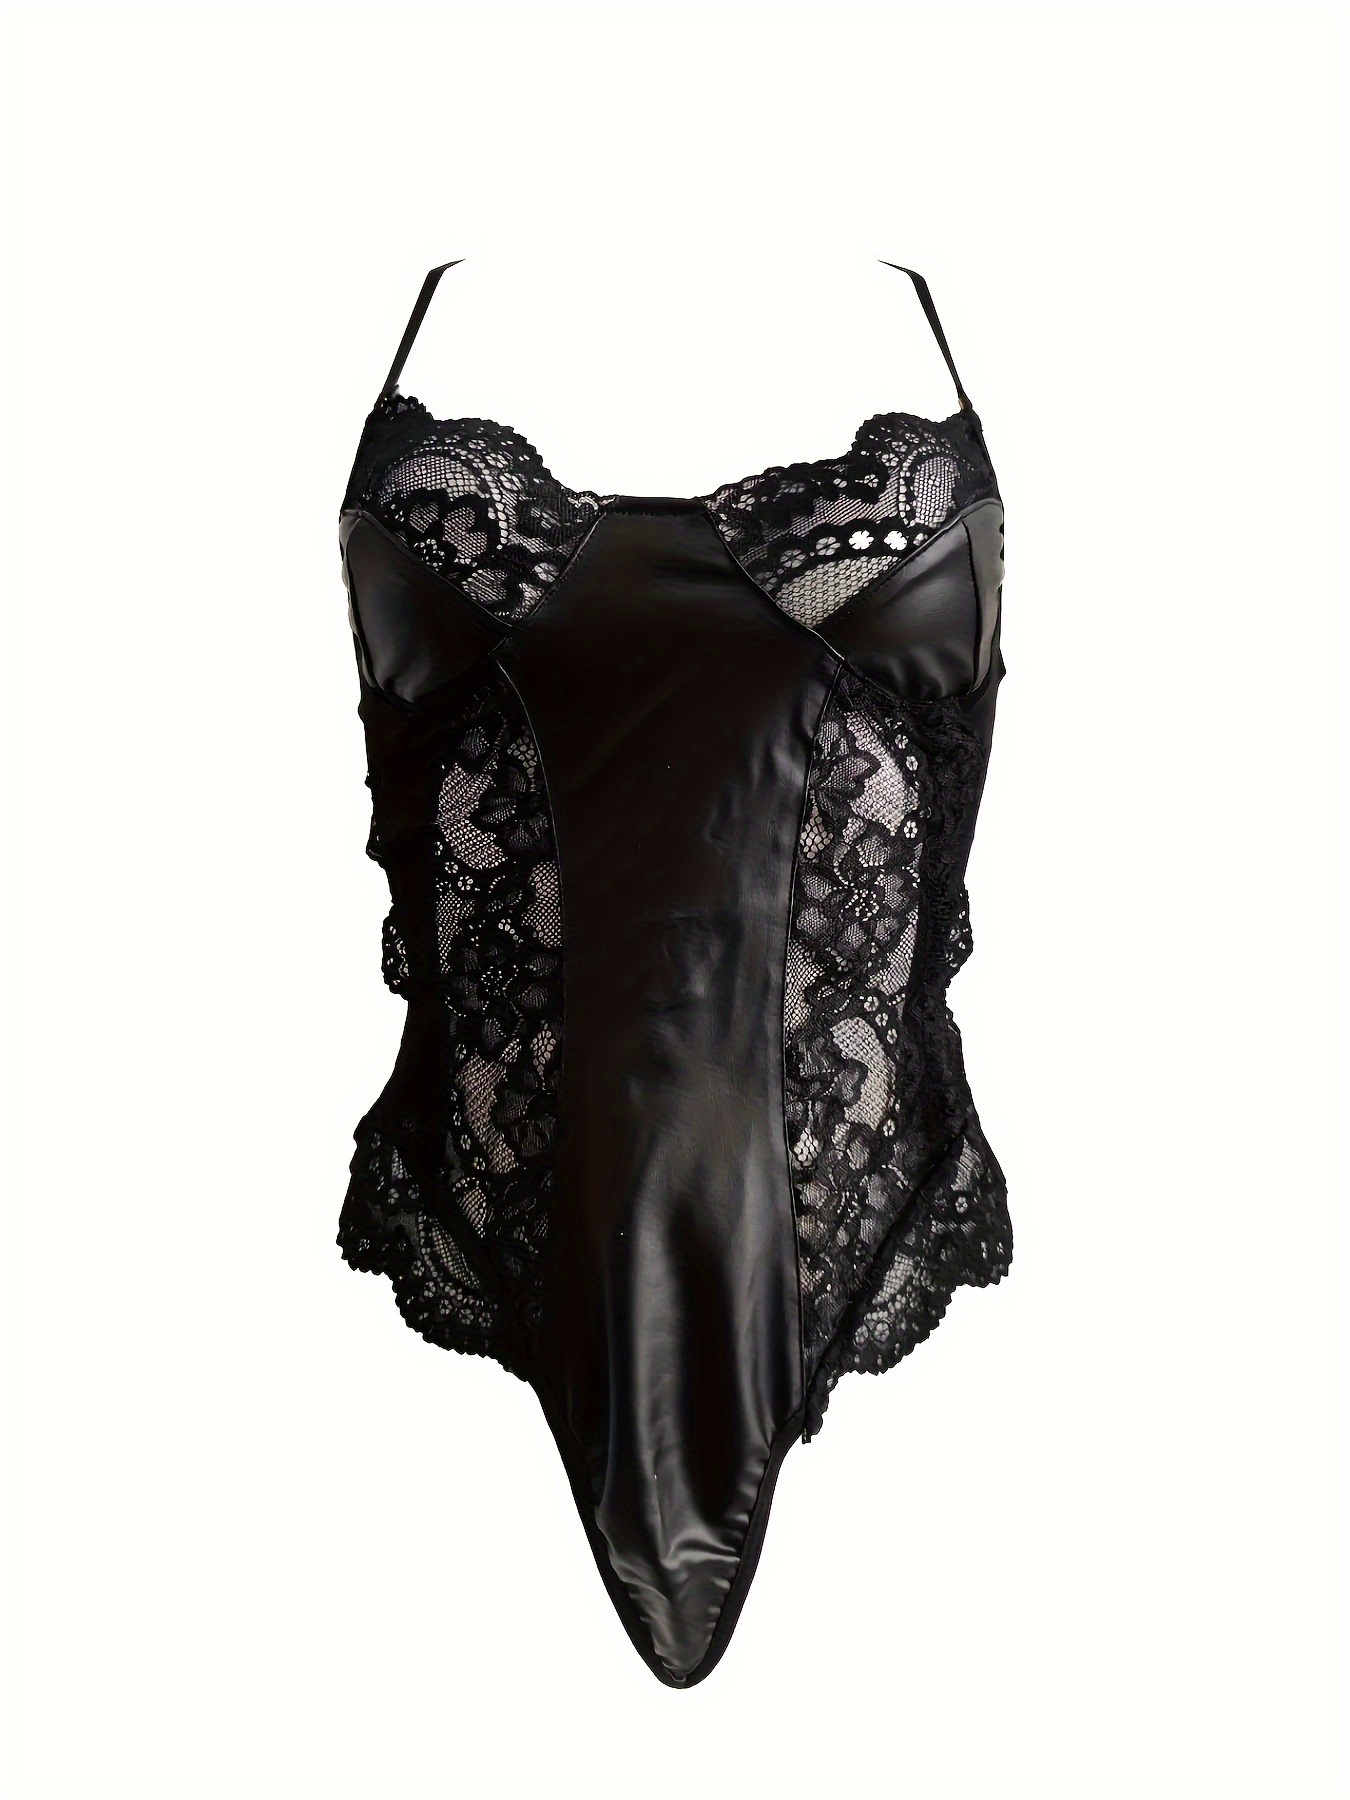 Women's Satin Teddy with Lace Trim and Vee Neckline - Black